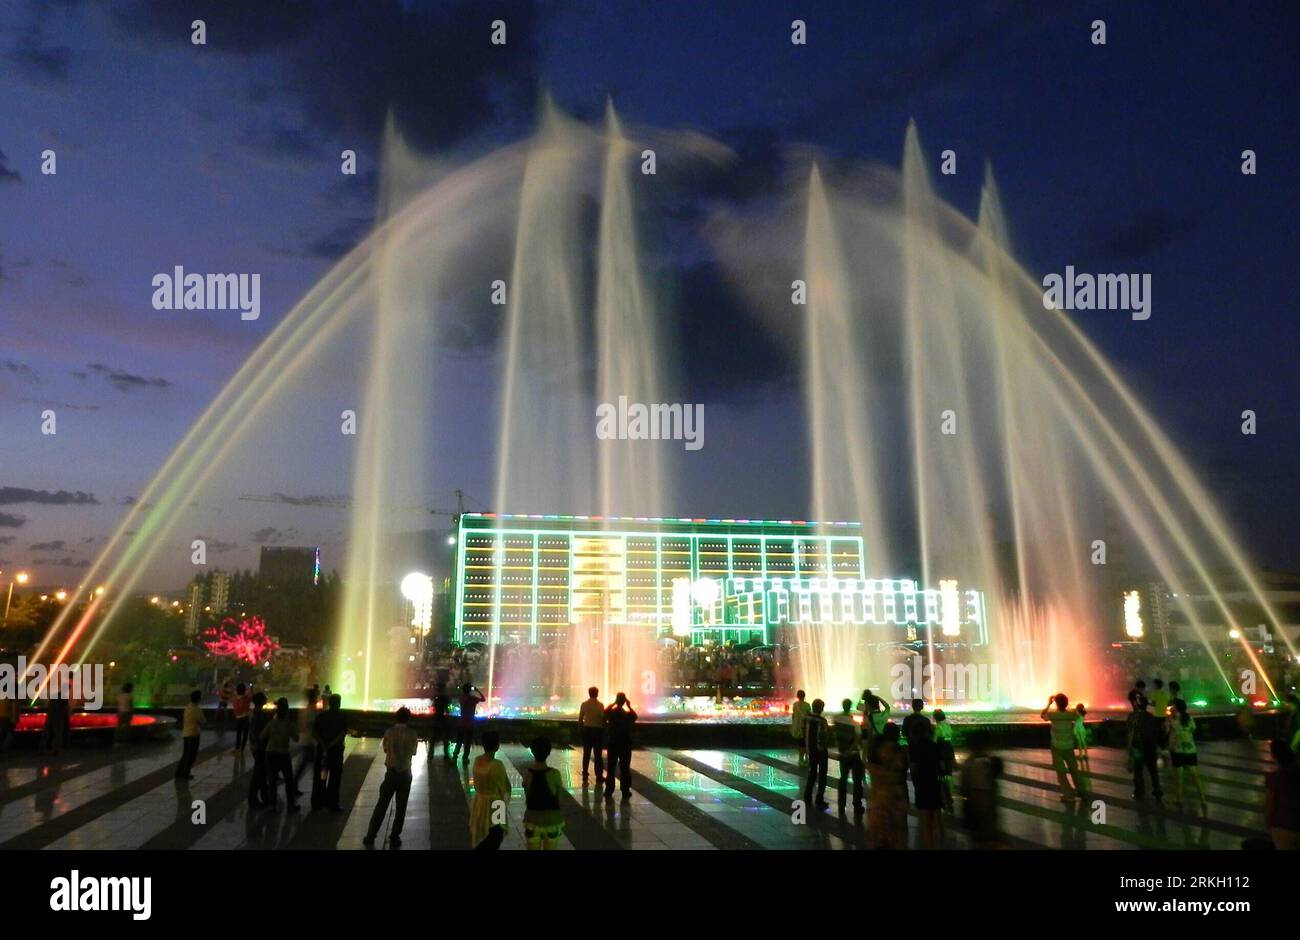 Bildnummer: 55674024  Datum: 01.08.2011  Copyright: imago/Xinhua (110802) -- HOHHOT, August 2, 2011 (Xinhua) -- Residents cool off themselves beside a music fountain at Ruyi Square in Hohhot, capital of north China s Inner Mongolia Autonomous Region, August 1, 2011. A heat wave swept here with the highest temperature topping 33 degree celsius in recent days. (Xinhua/Li Yunping) (zl) CHINA-INNER MONGOLIA-HEAT WAVE (CN) PUBLICATIONxNOTxINxCHN Reisen CHN xns 2011 quer o0 Brunnen, Wasserspiele, Beleuchtung, Restlicht, Abend, Dämmerung, Abenddämmerung, Totale    Bildnummer 55674024 Date 01 08 2011 Stock Photo